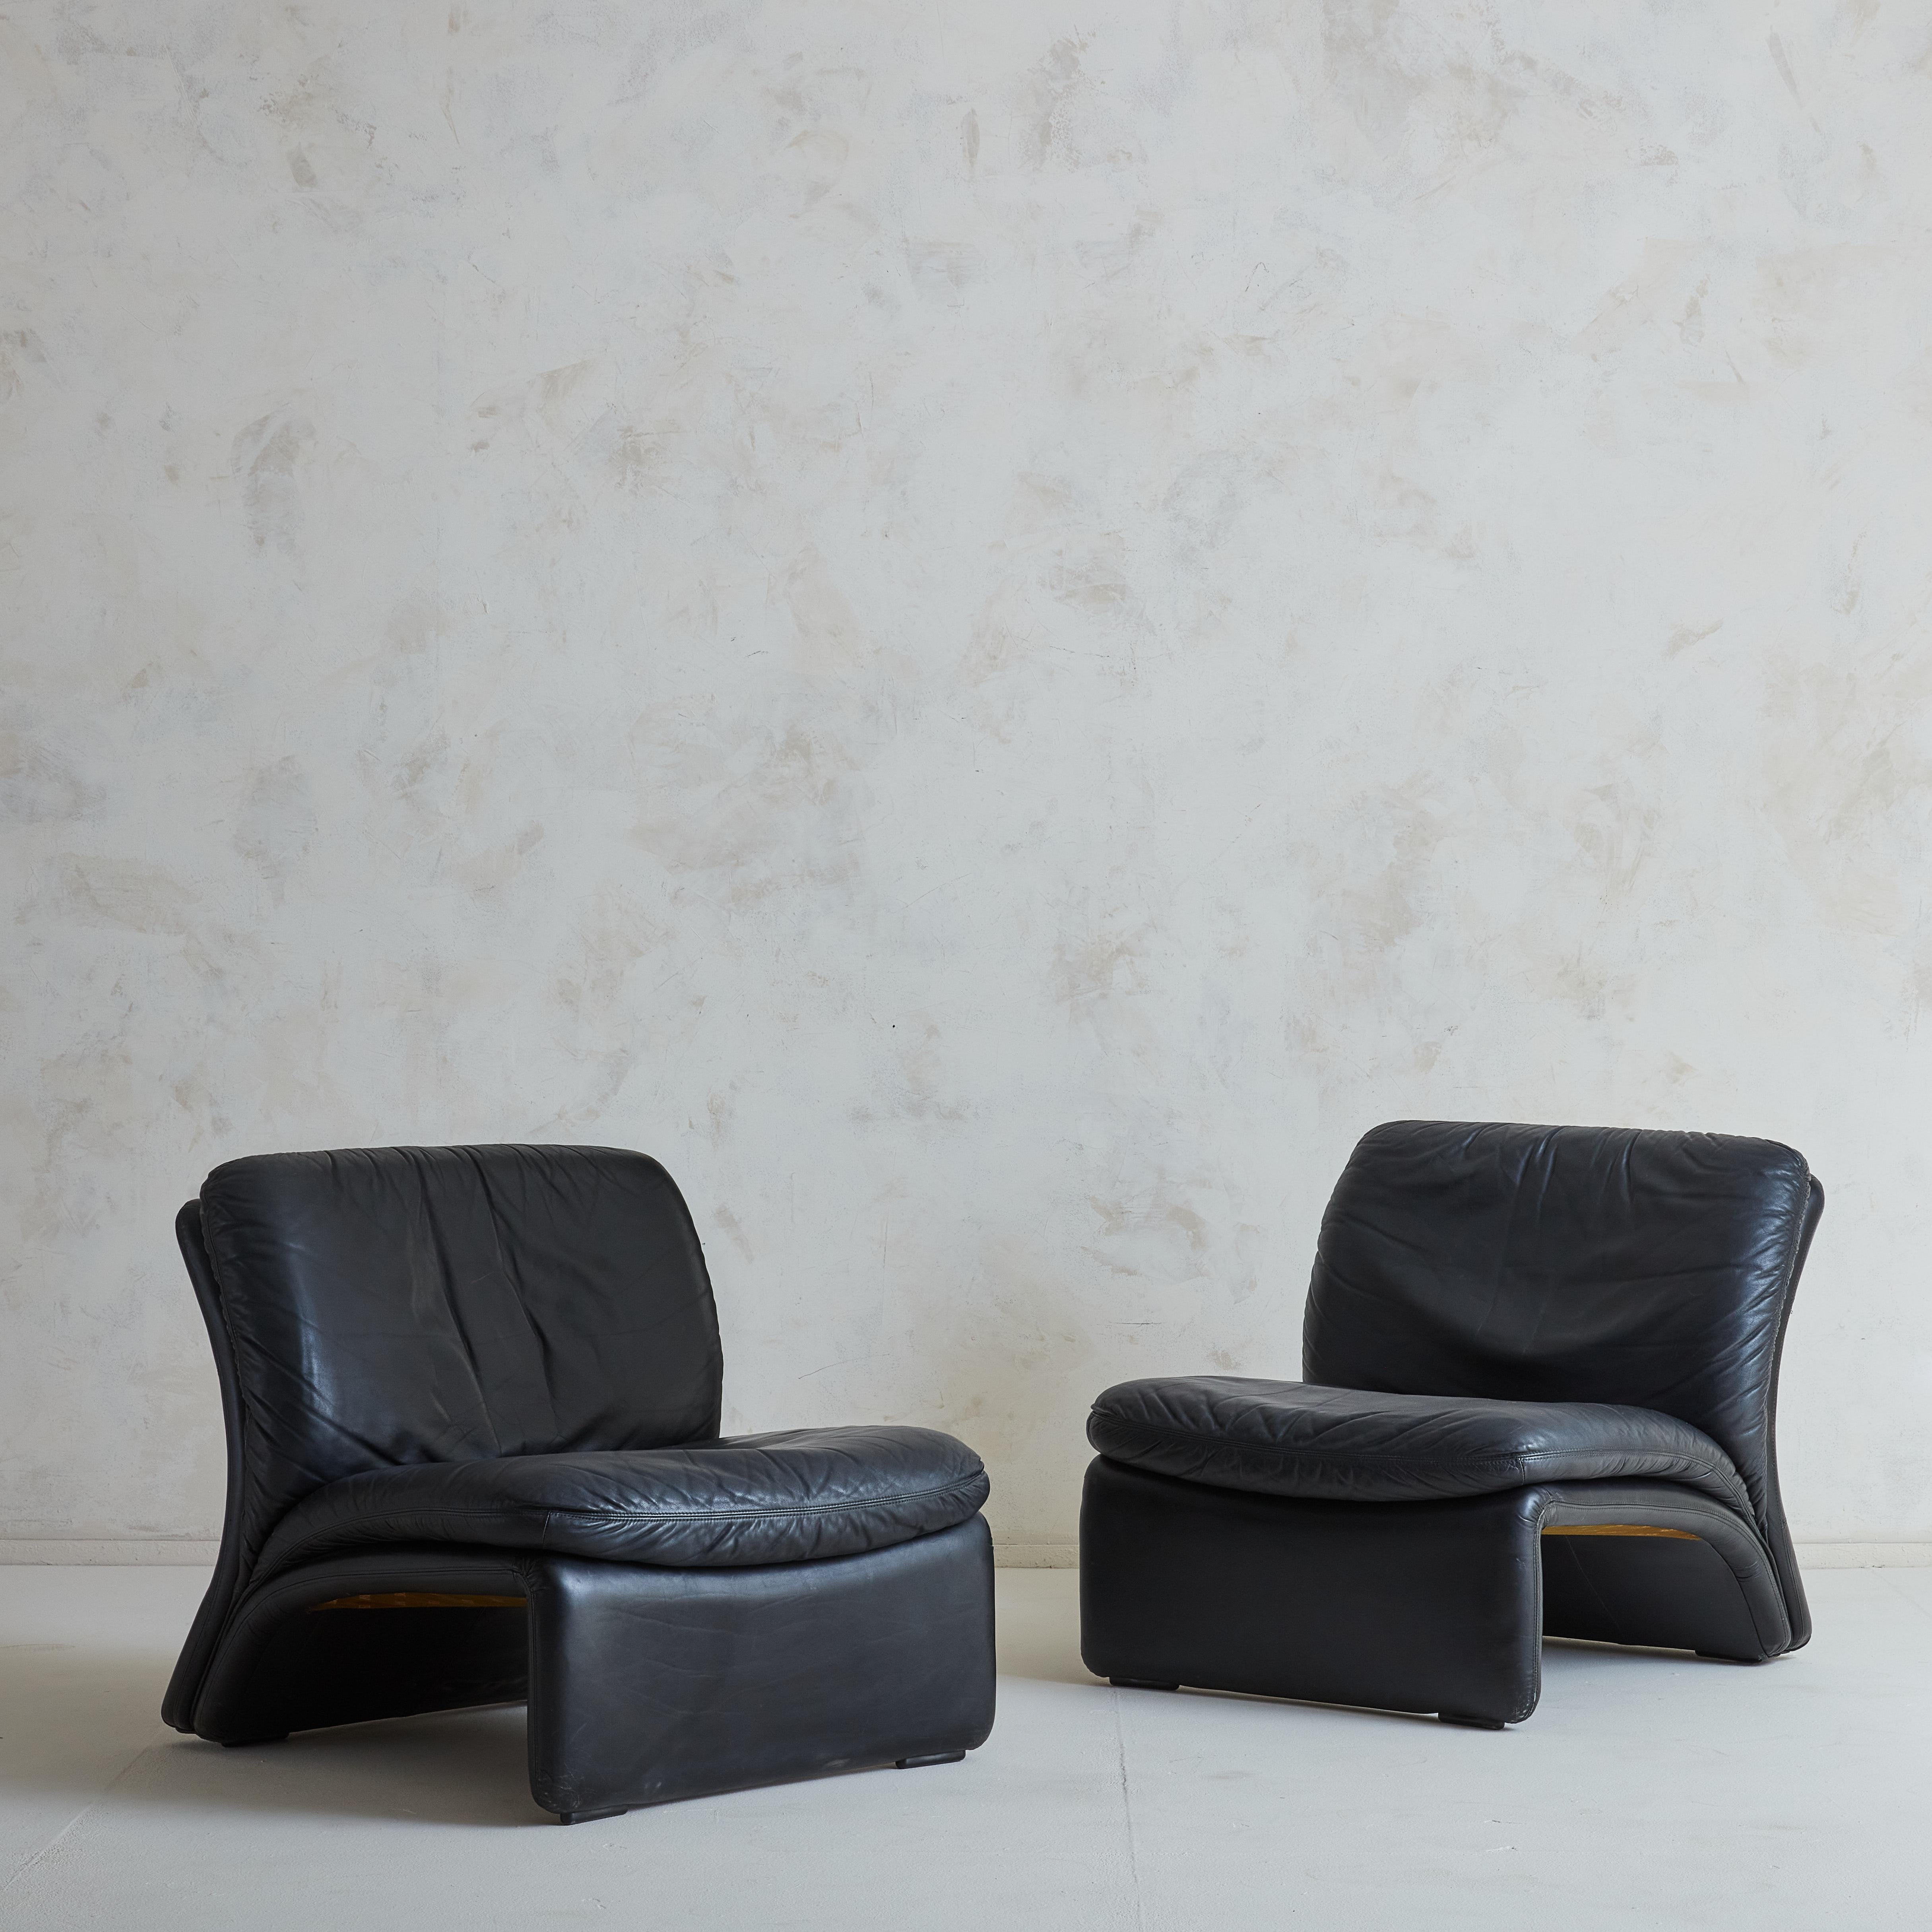 A modern black leather armchair produced in the late 20th century by B&T Gruppo Industriale Salotti. The sculptural shape make this a unique form with a comfortable, ergonomic sit. Each chair retains the original black leather and B&T Salotti label